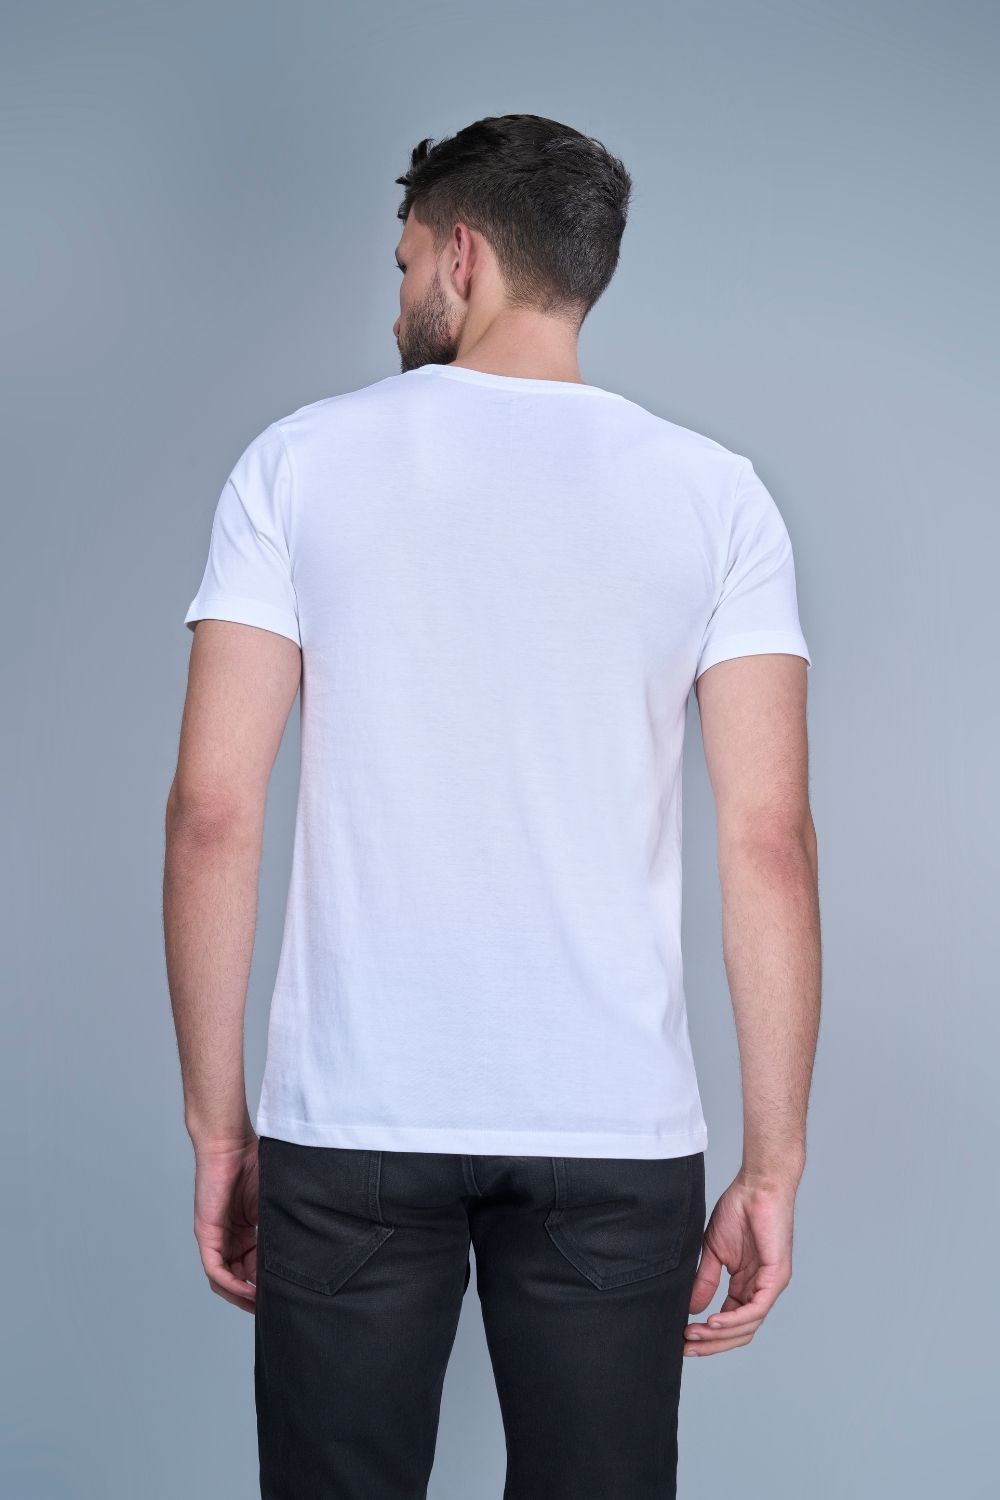 White colored, solid t shirt for men with round neck and half sleeves, back view.